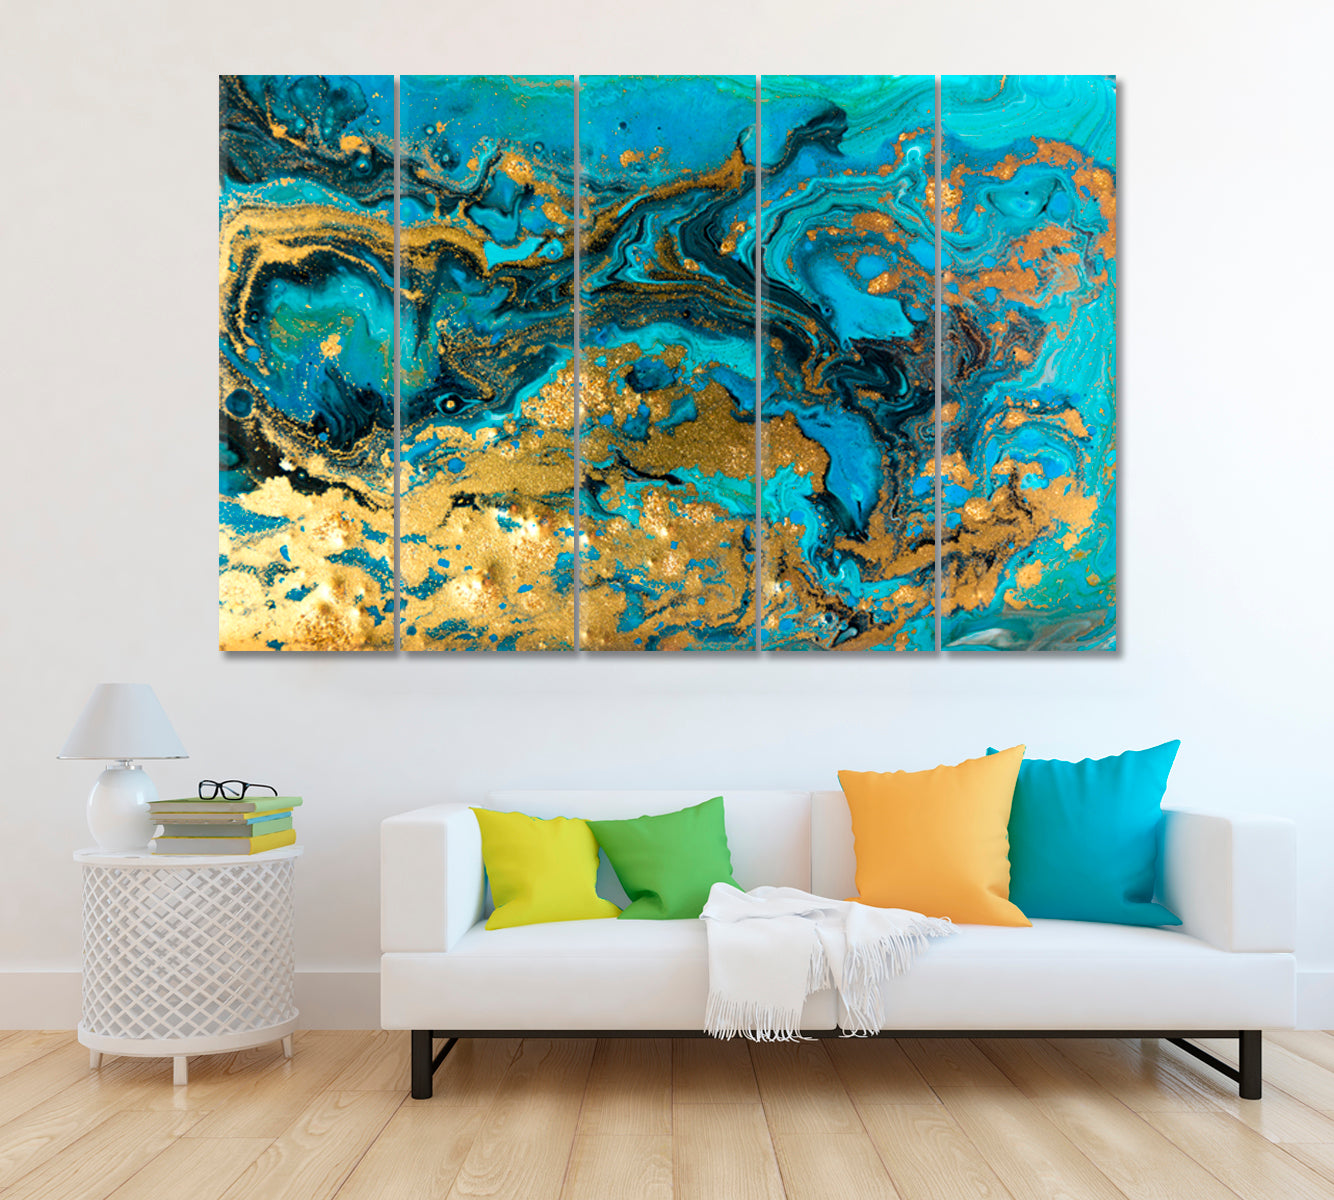 Blue and Gold Marbling Pattern Canvas Print ArtLexy 5 Panels 36"x24" inches 